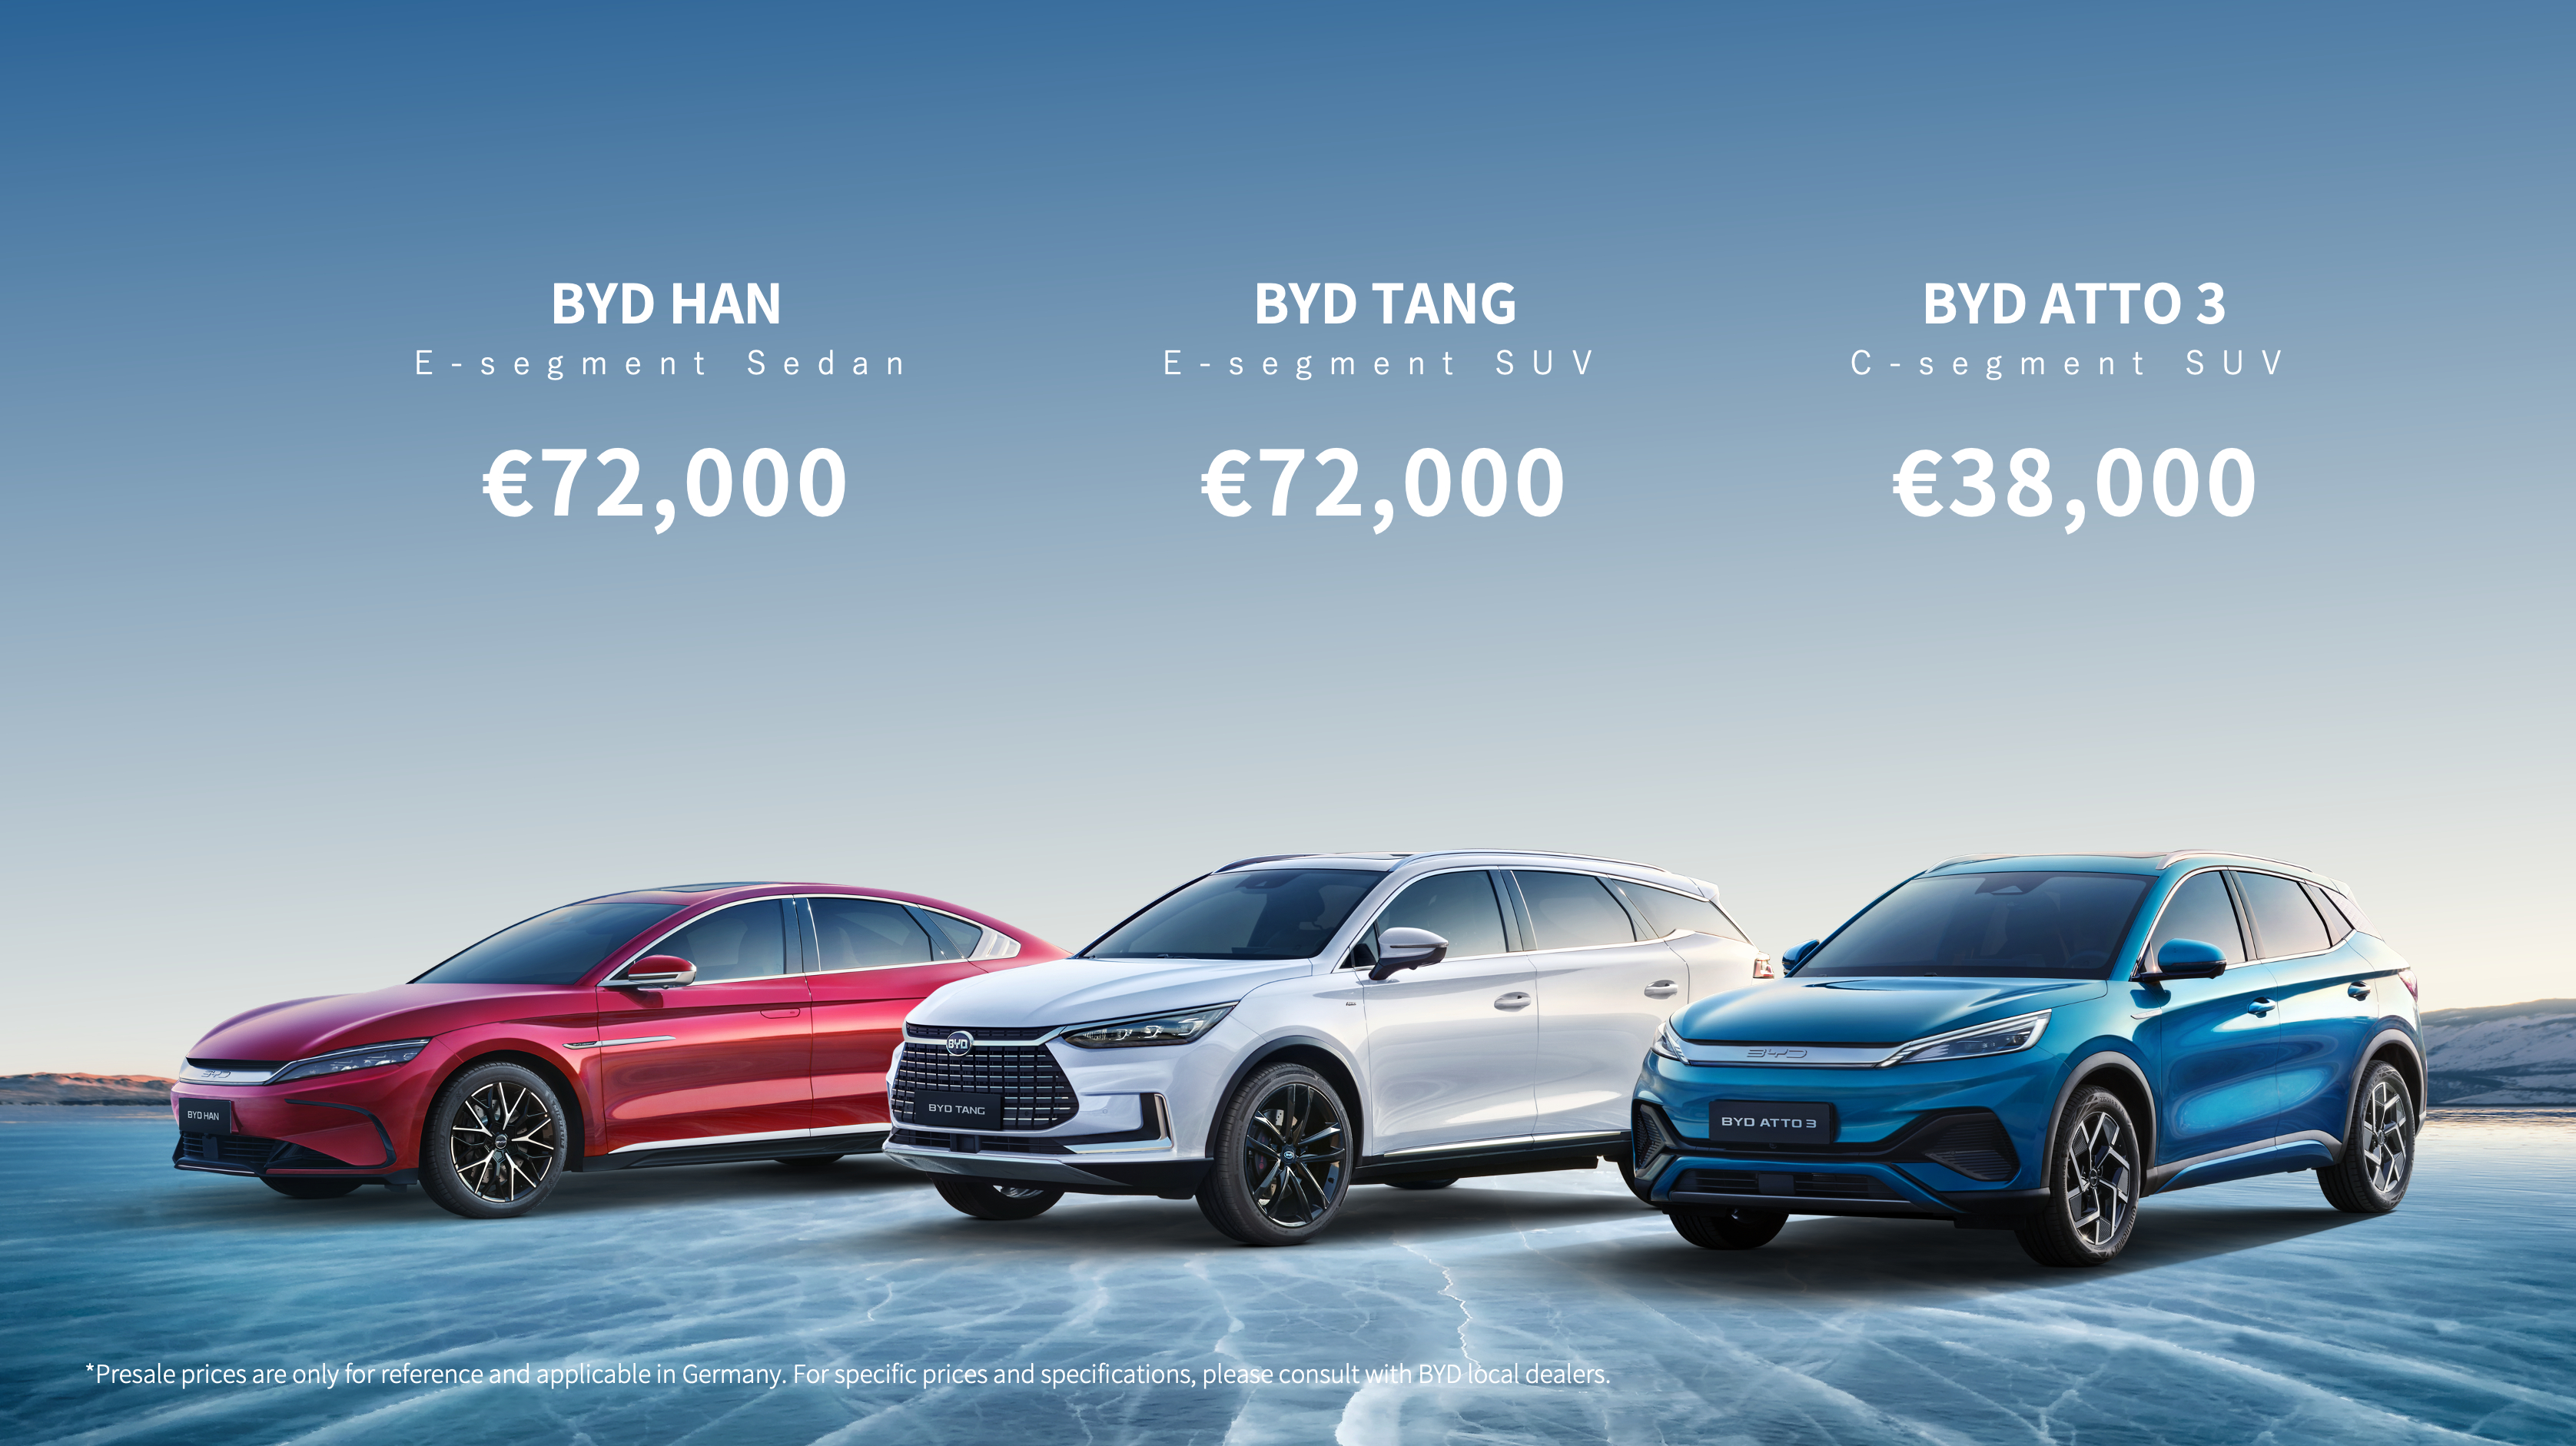 BYD Atto 3 launches in Ireland